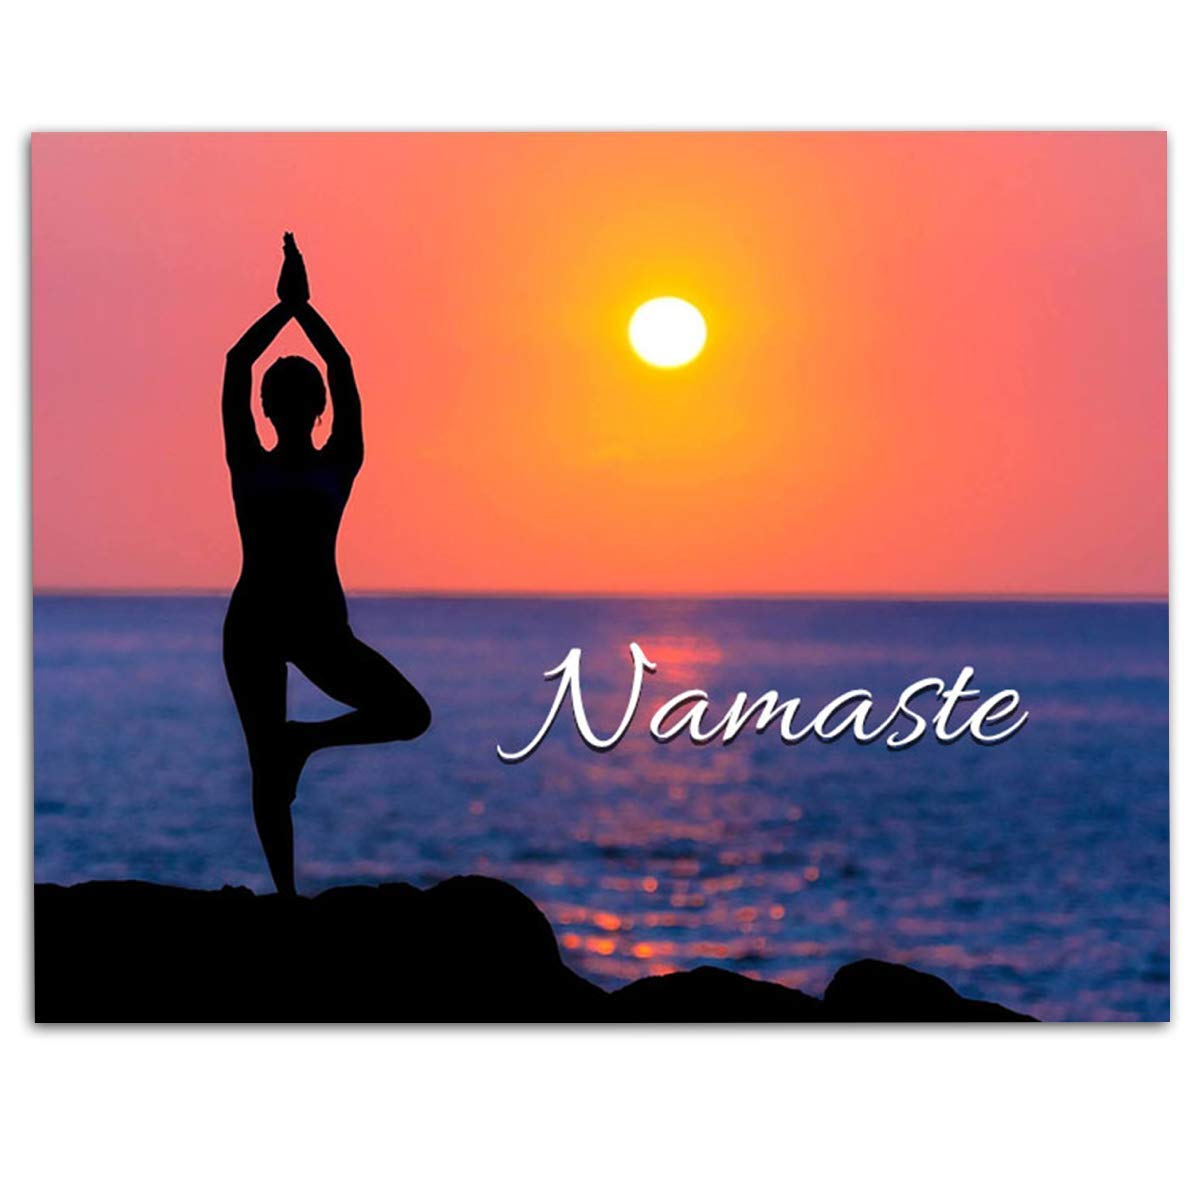 Namaste Sunset for Yoga Lovers- 8 x 10 Print Wall Art Ready to Frame. Modern Home D?cor, Office D?cor & Wall Print. Makes a Perfect Zen & Inspiration Gift for Yoga Lovers- Give Some Peace & Harmony.